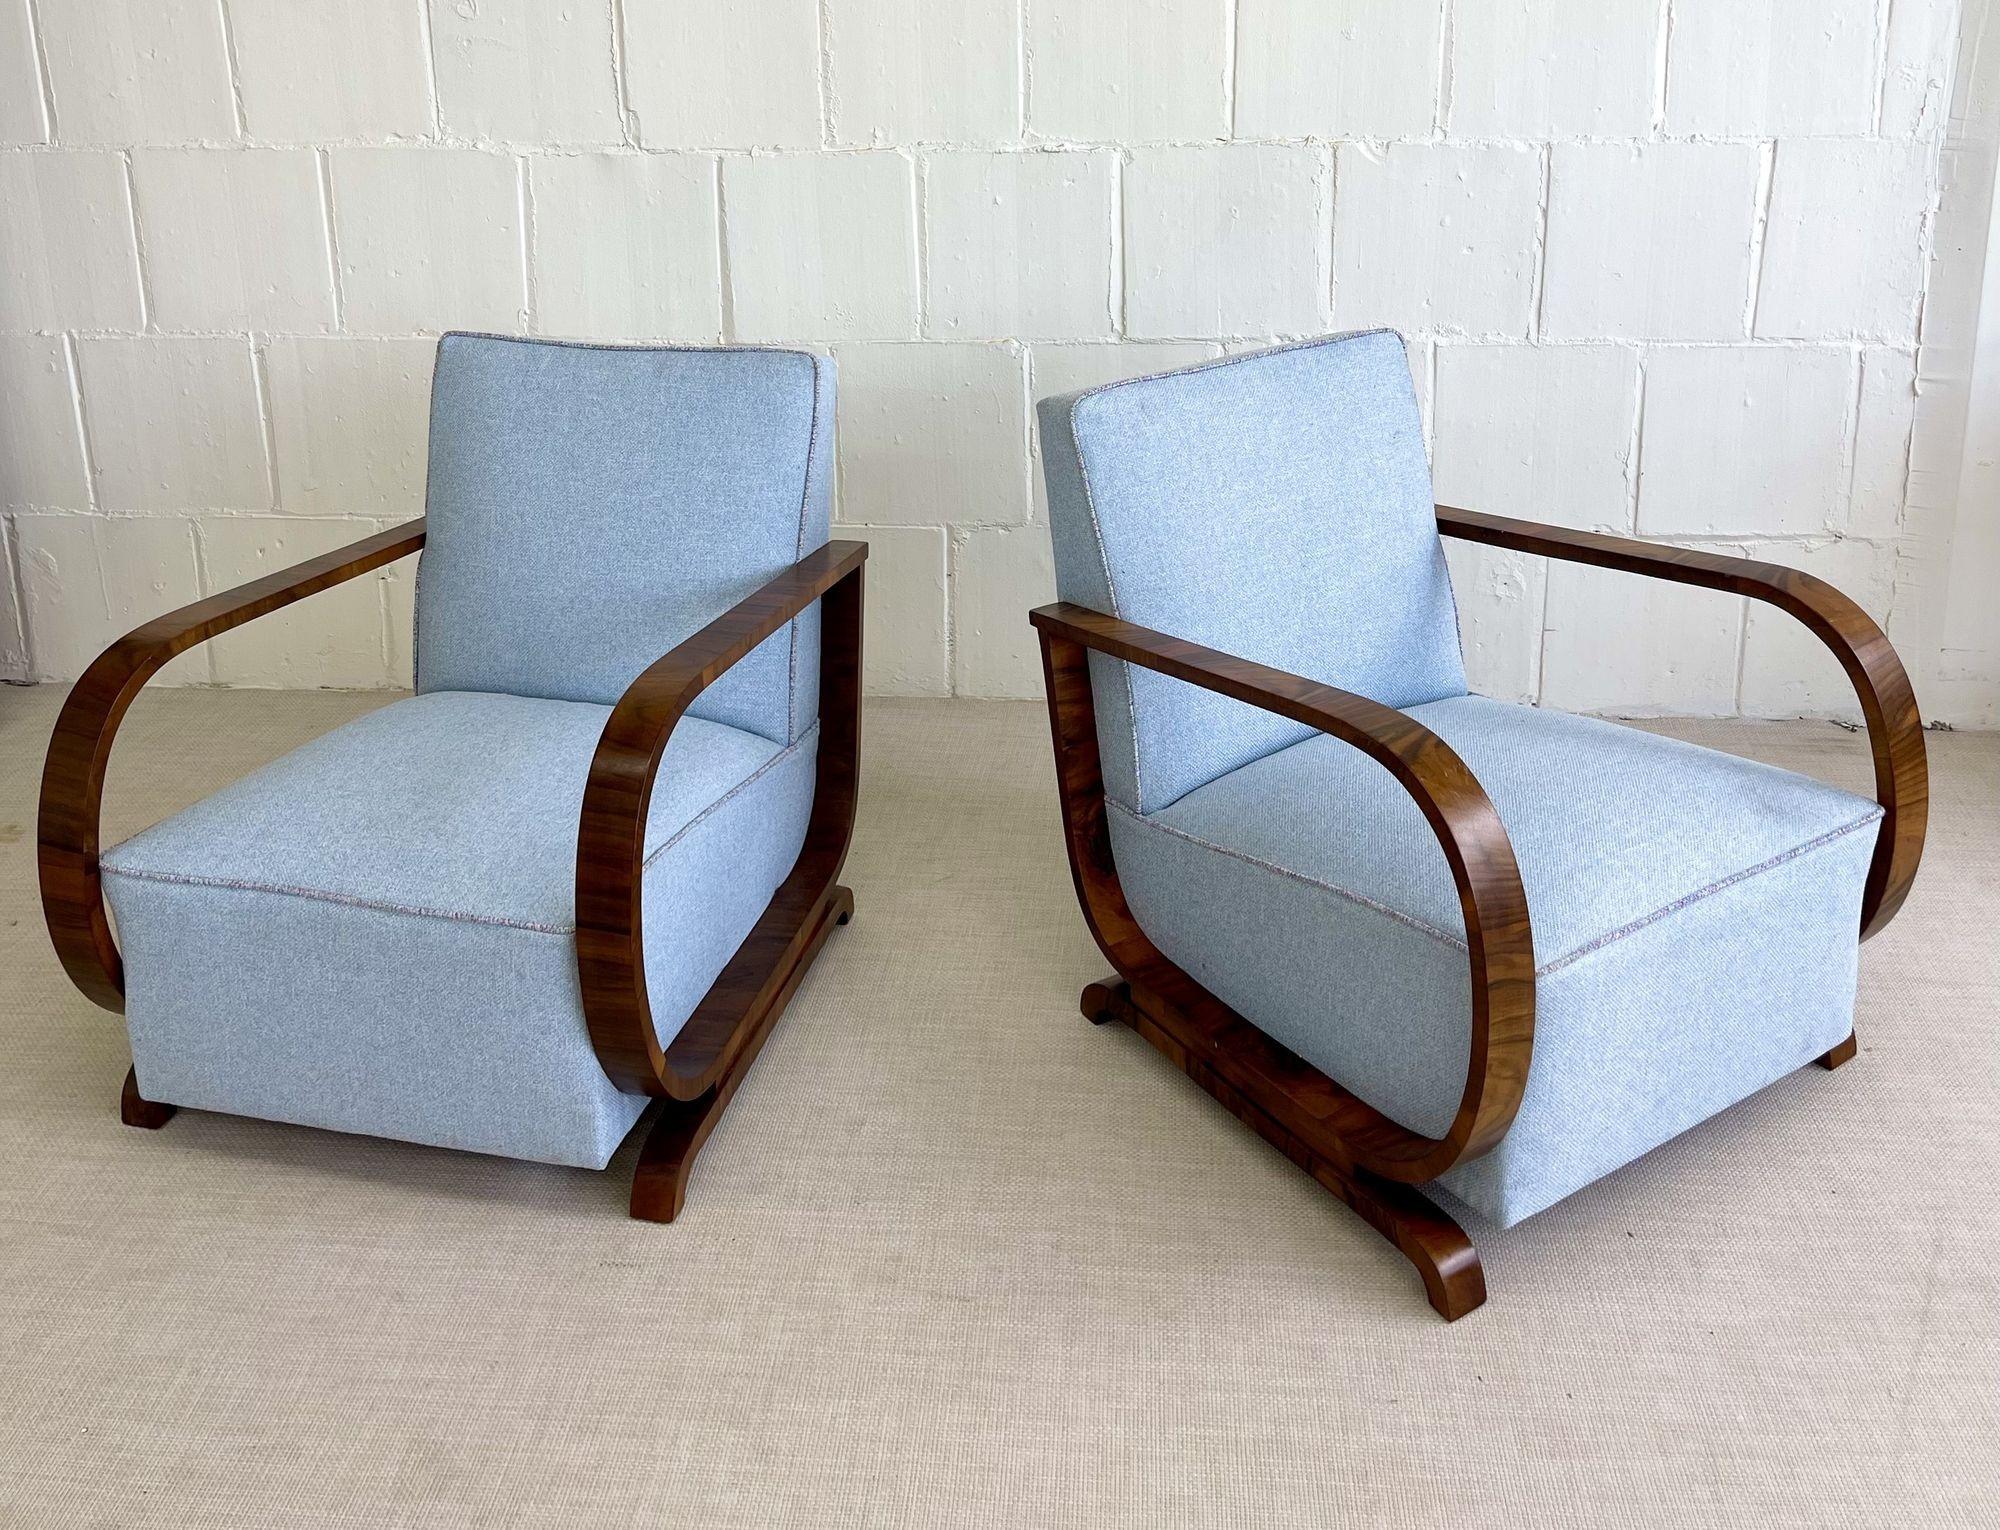 Pair of Art Deco lounge chairs, walnut, fabric, Sweden, Early 20th Century
 
Pair of early 20th century Art Deco lounge chairs by an unknown Swedish designer. This low profile pair of arm chairs has a walnut frame and later upholstery in good